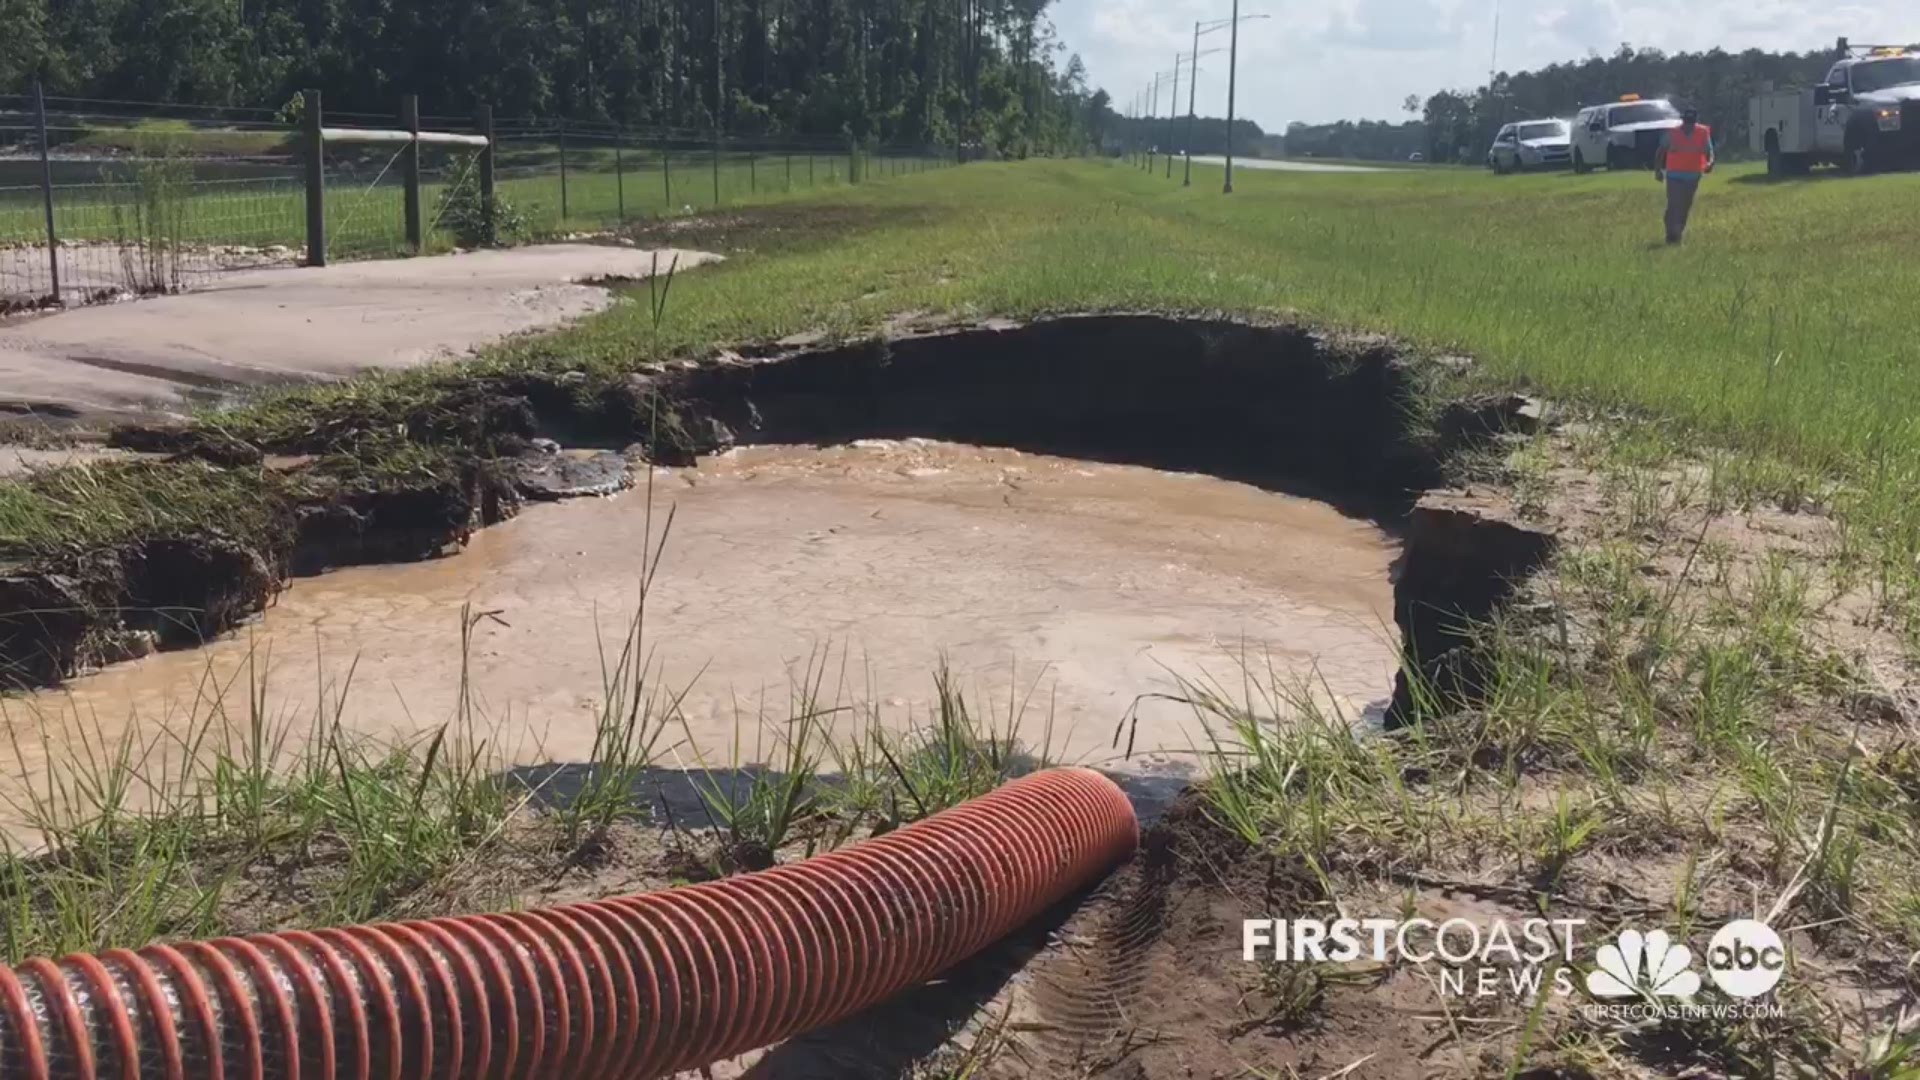 A 20-inch water main break knocked out water for Nocatee residents Sunday afternoon. JEA crews rerouted the water as they worked to fix the break off Nocatee Parkway and Valley Ridge.